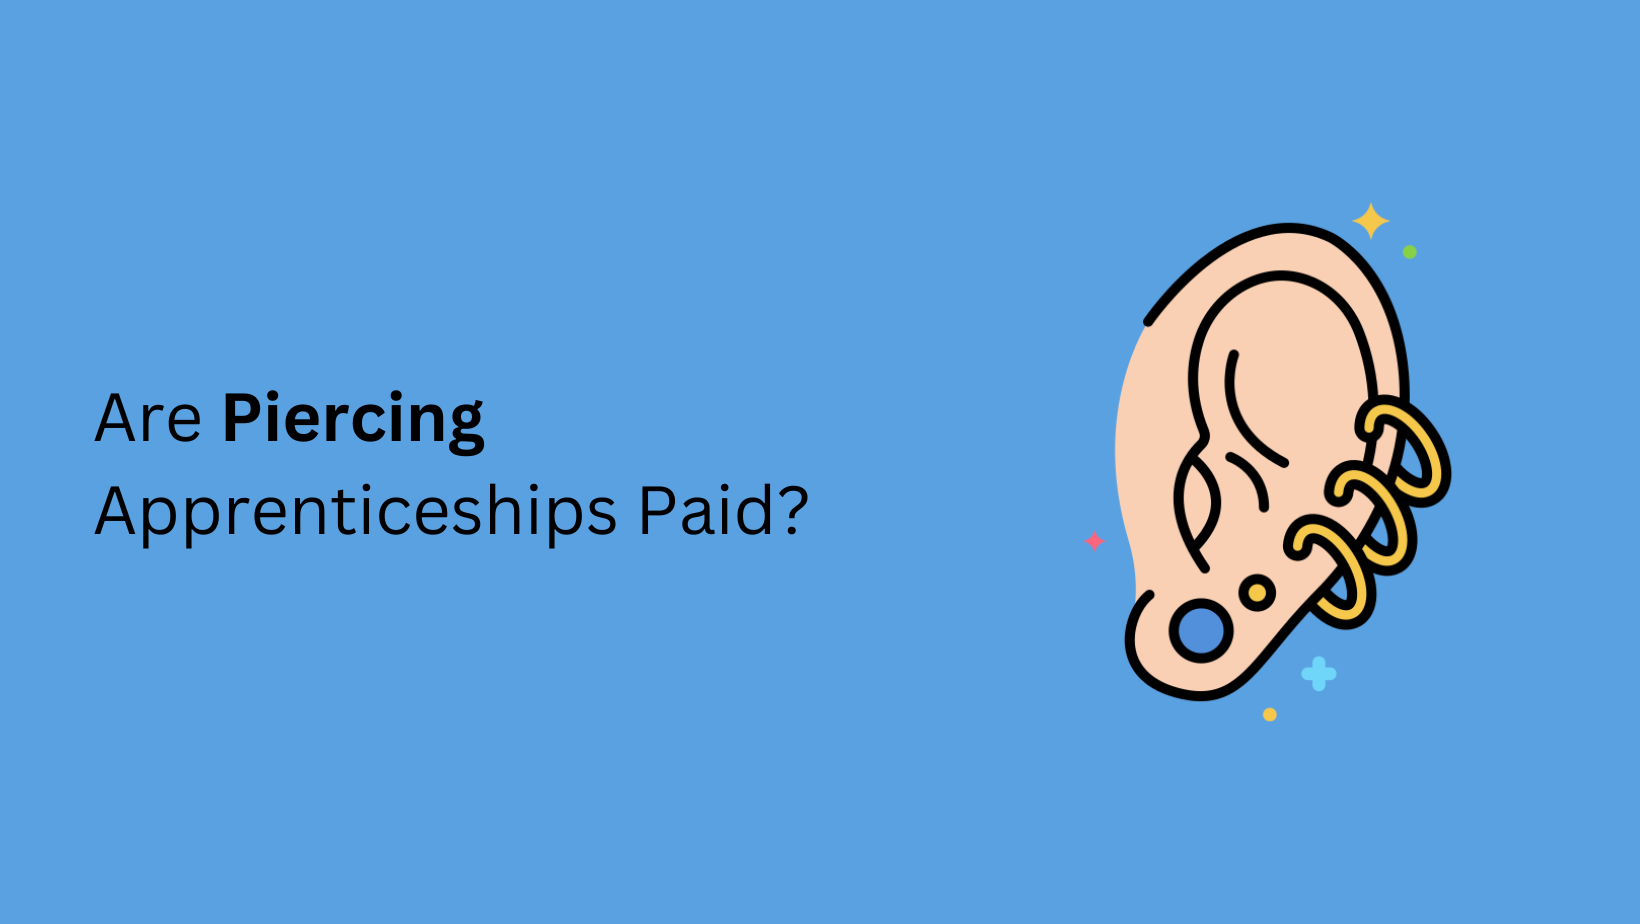 Are Piercing Apprenticeships Paid